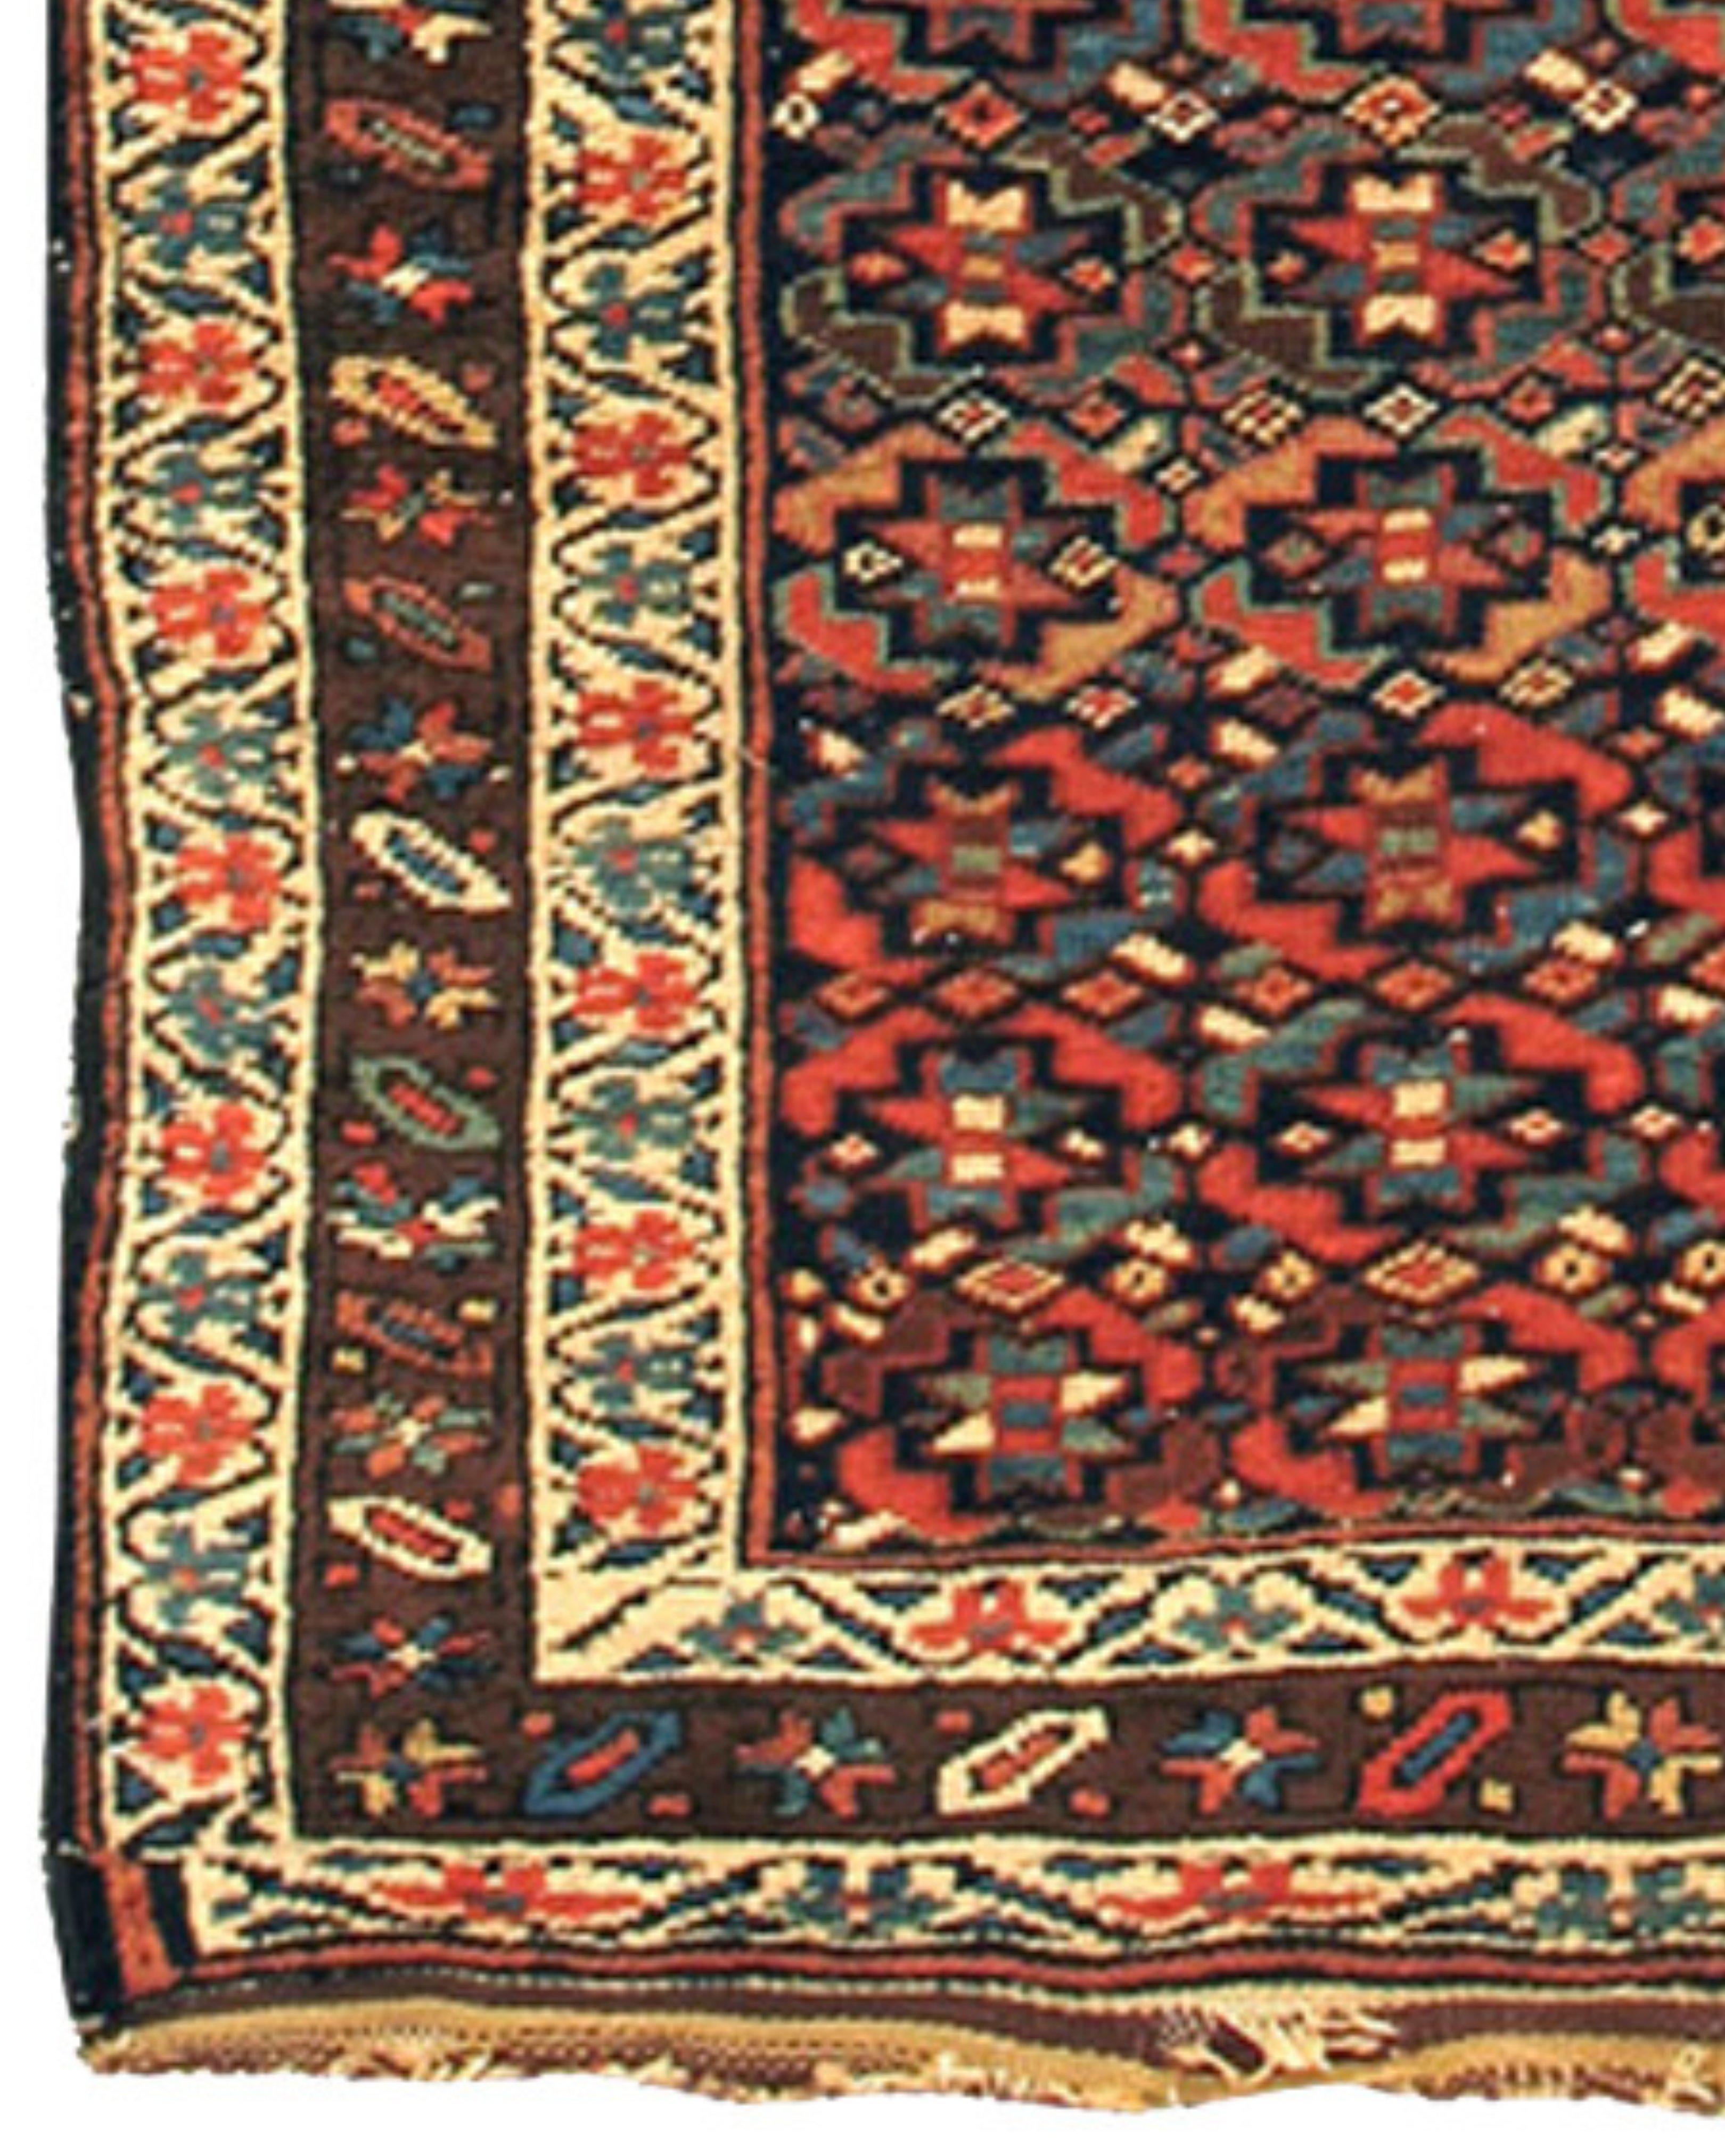 Antique Northwest Persian Runner Rug, 19th Century In Excellent Condition For Sale In San Francisco, CA